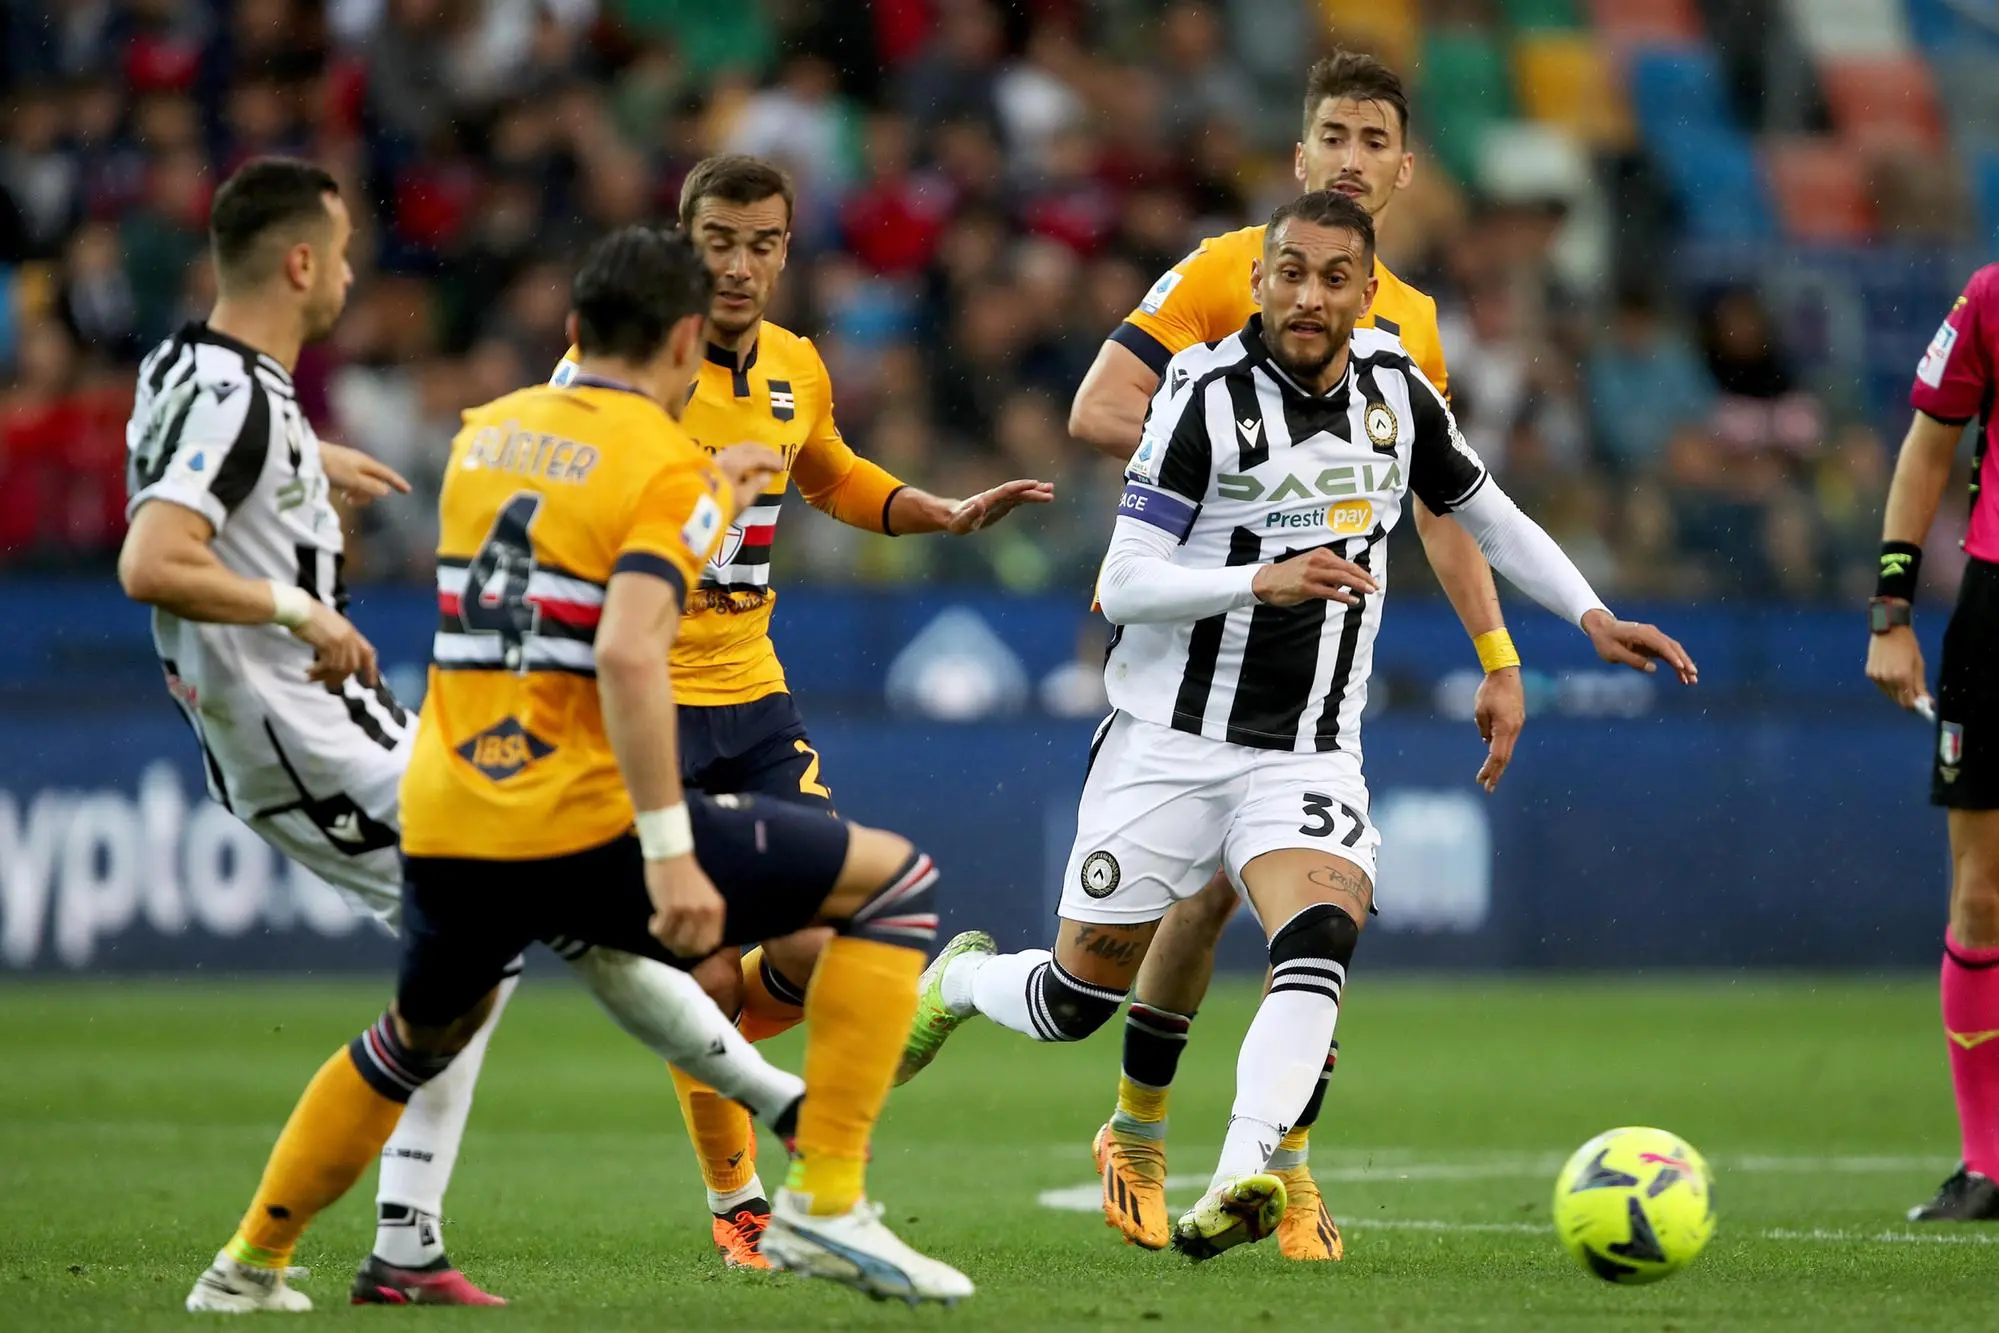 Udinese's Roberto Pereyra (R) and Sampdoria's Harry Winks in action during the Italian Serie A soccer match Udinese Calcio vs UC Sampdoria at the Friuli - Dacia Arena stadium in Udine, Italy, 8 May 2023. ANSA / GABRIELE MENIS